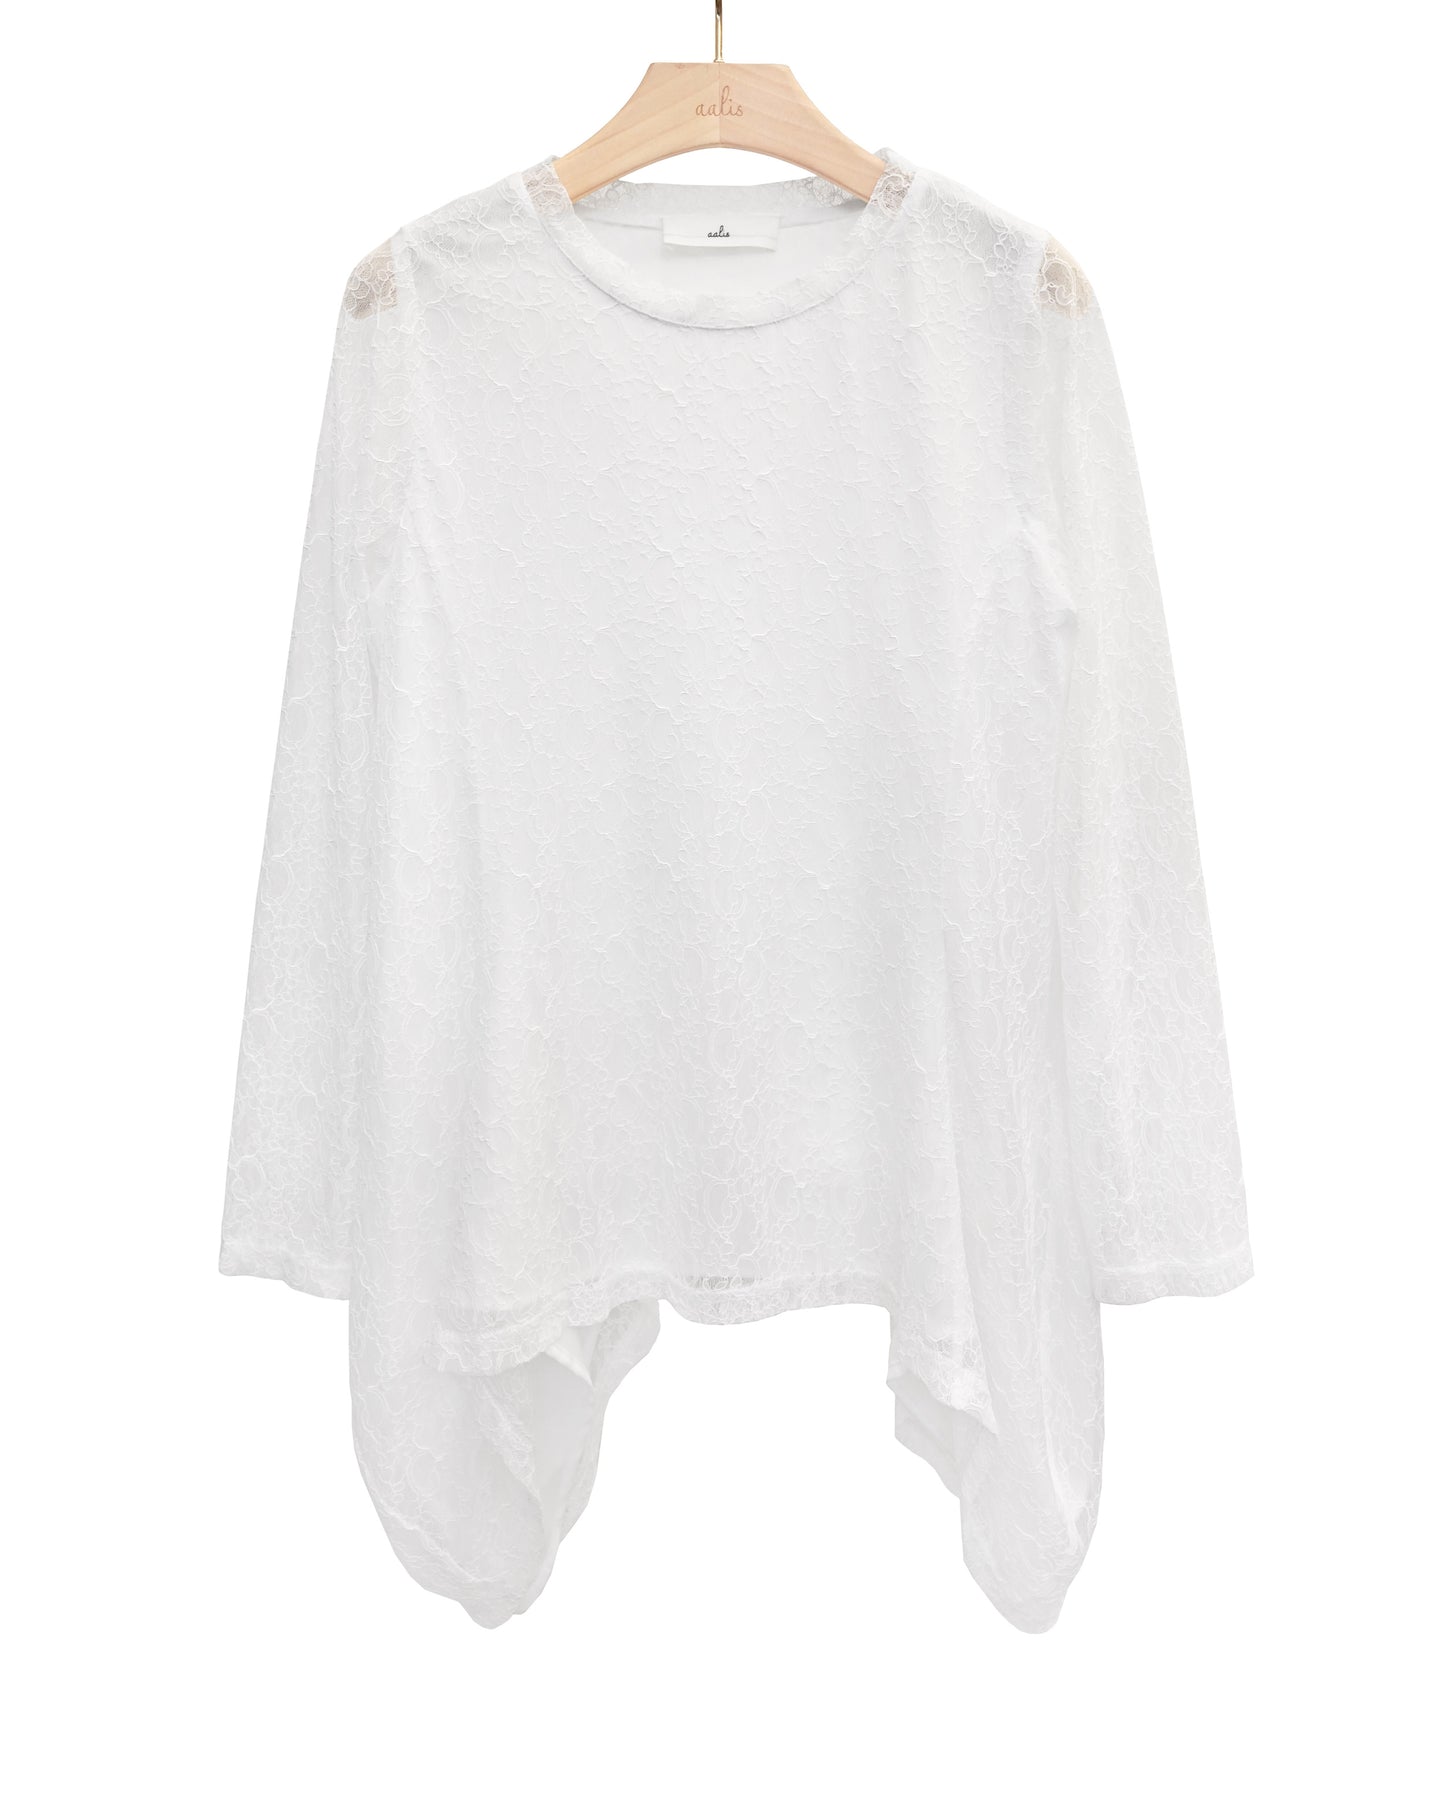 Load image into Gallery viewer, aalis CACA drape detail top (White lace)
